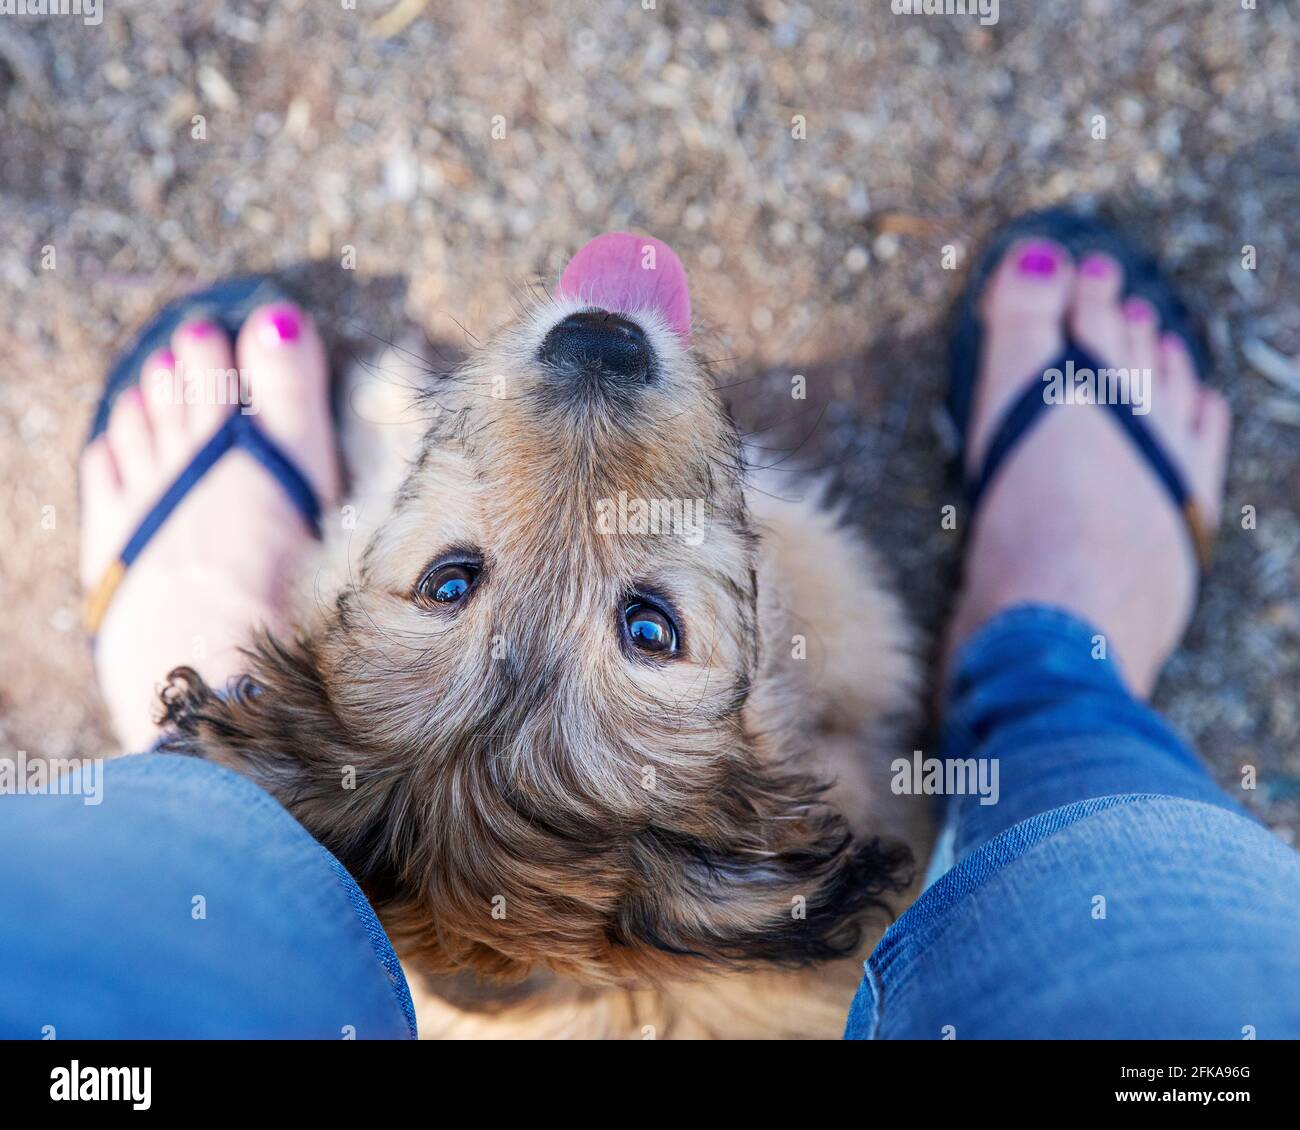 Cute mixed breed poodle puppy standing between legs of owner. Stock Photo